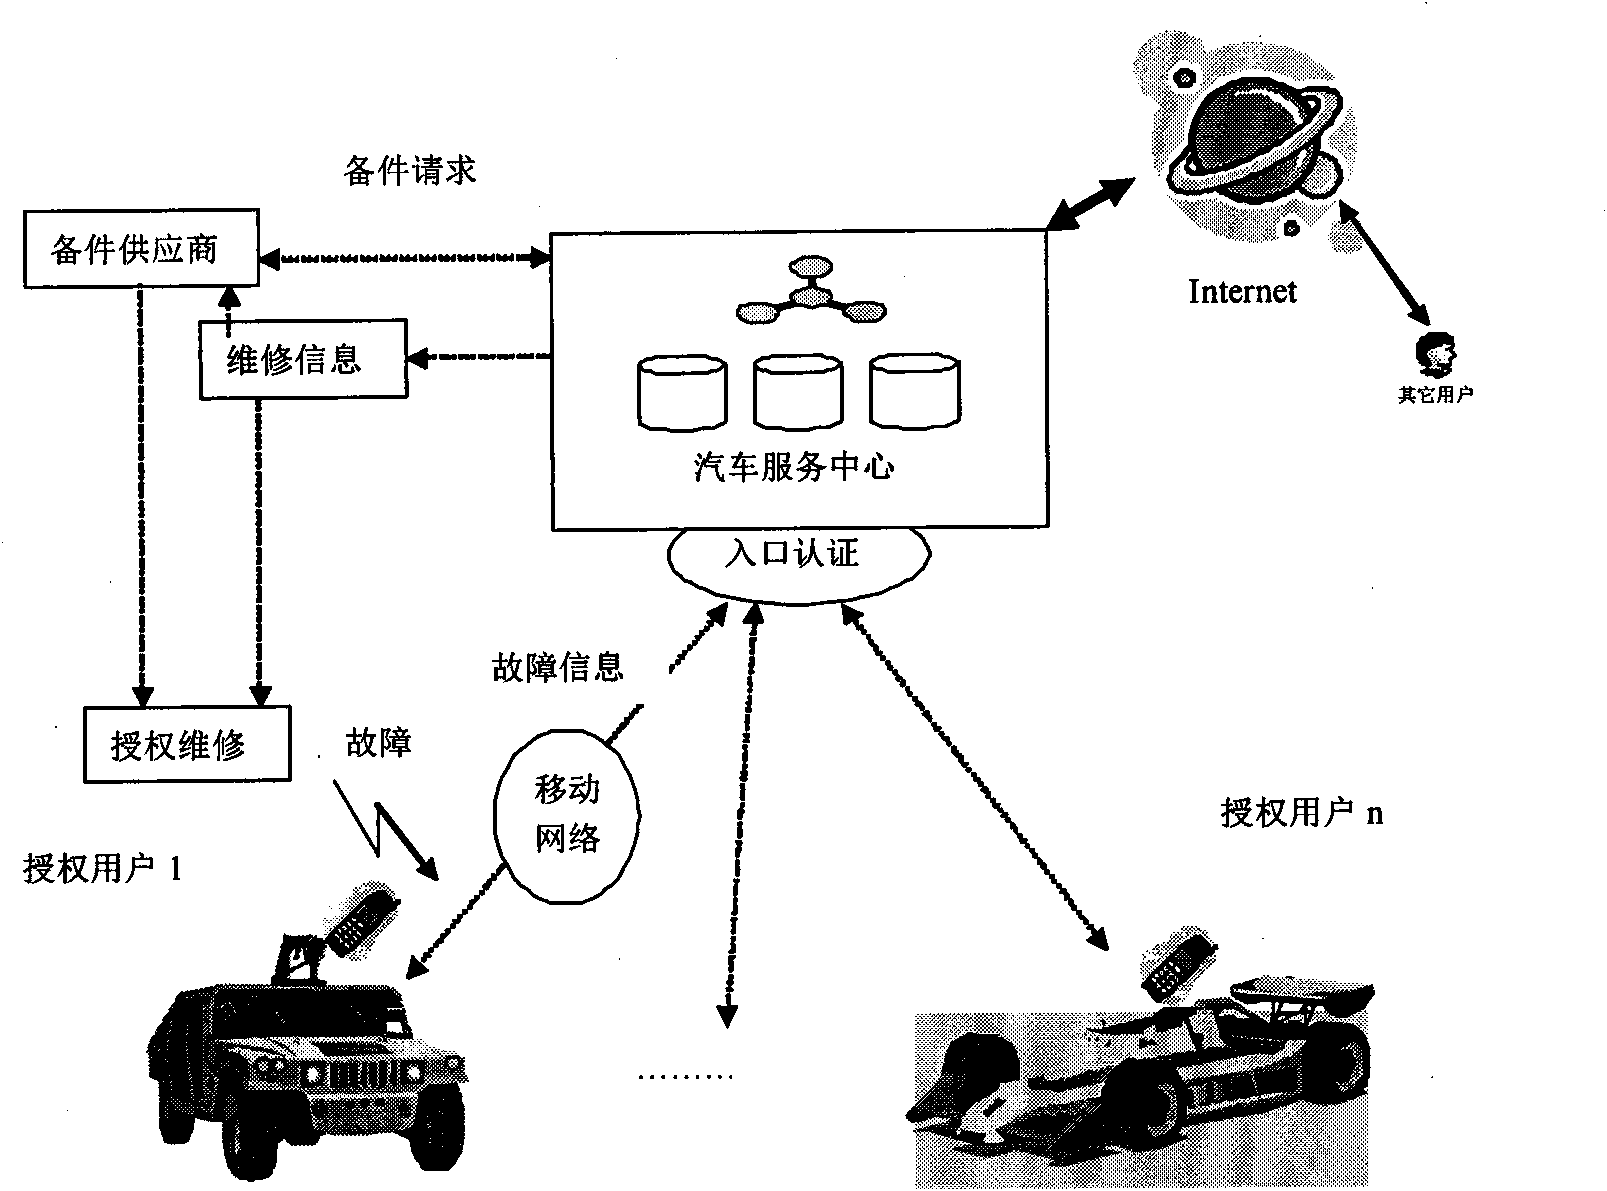 Automobile fault diagnosis system based on ontology and mobile network